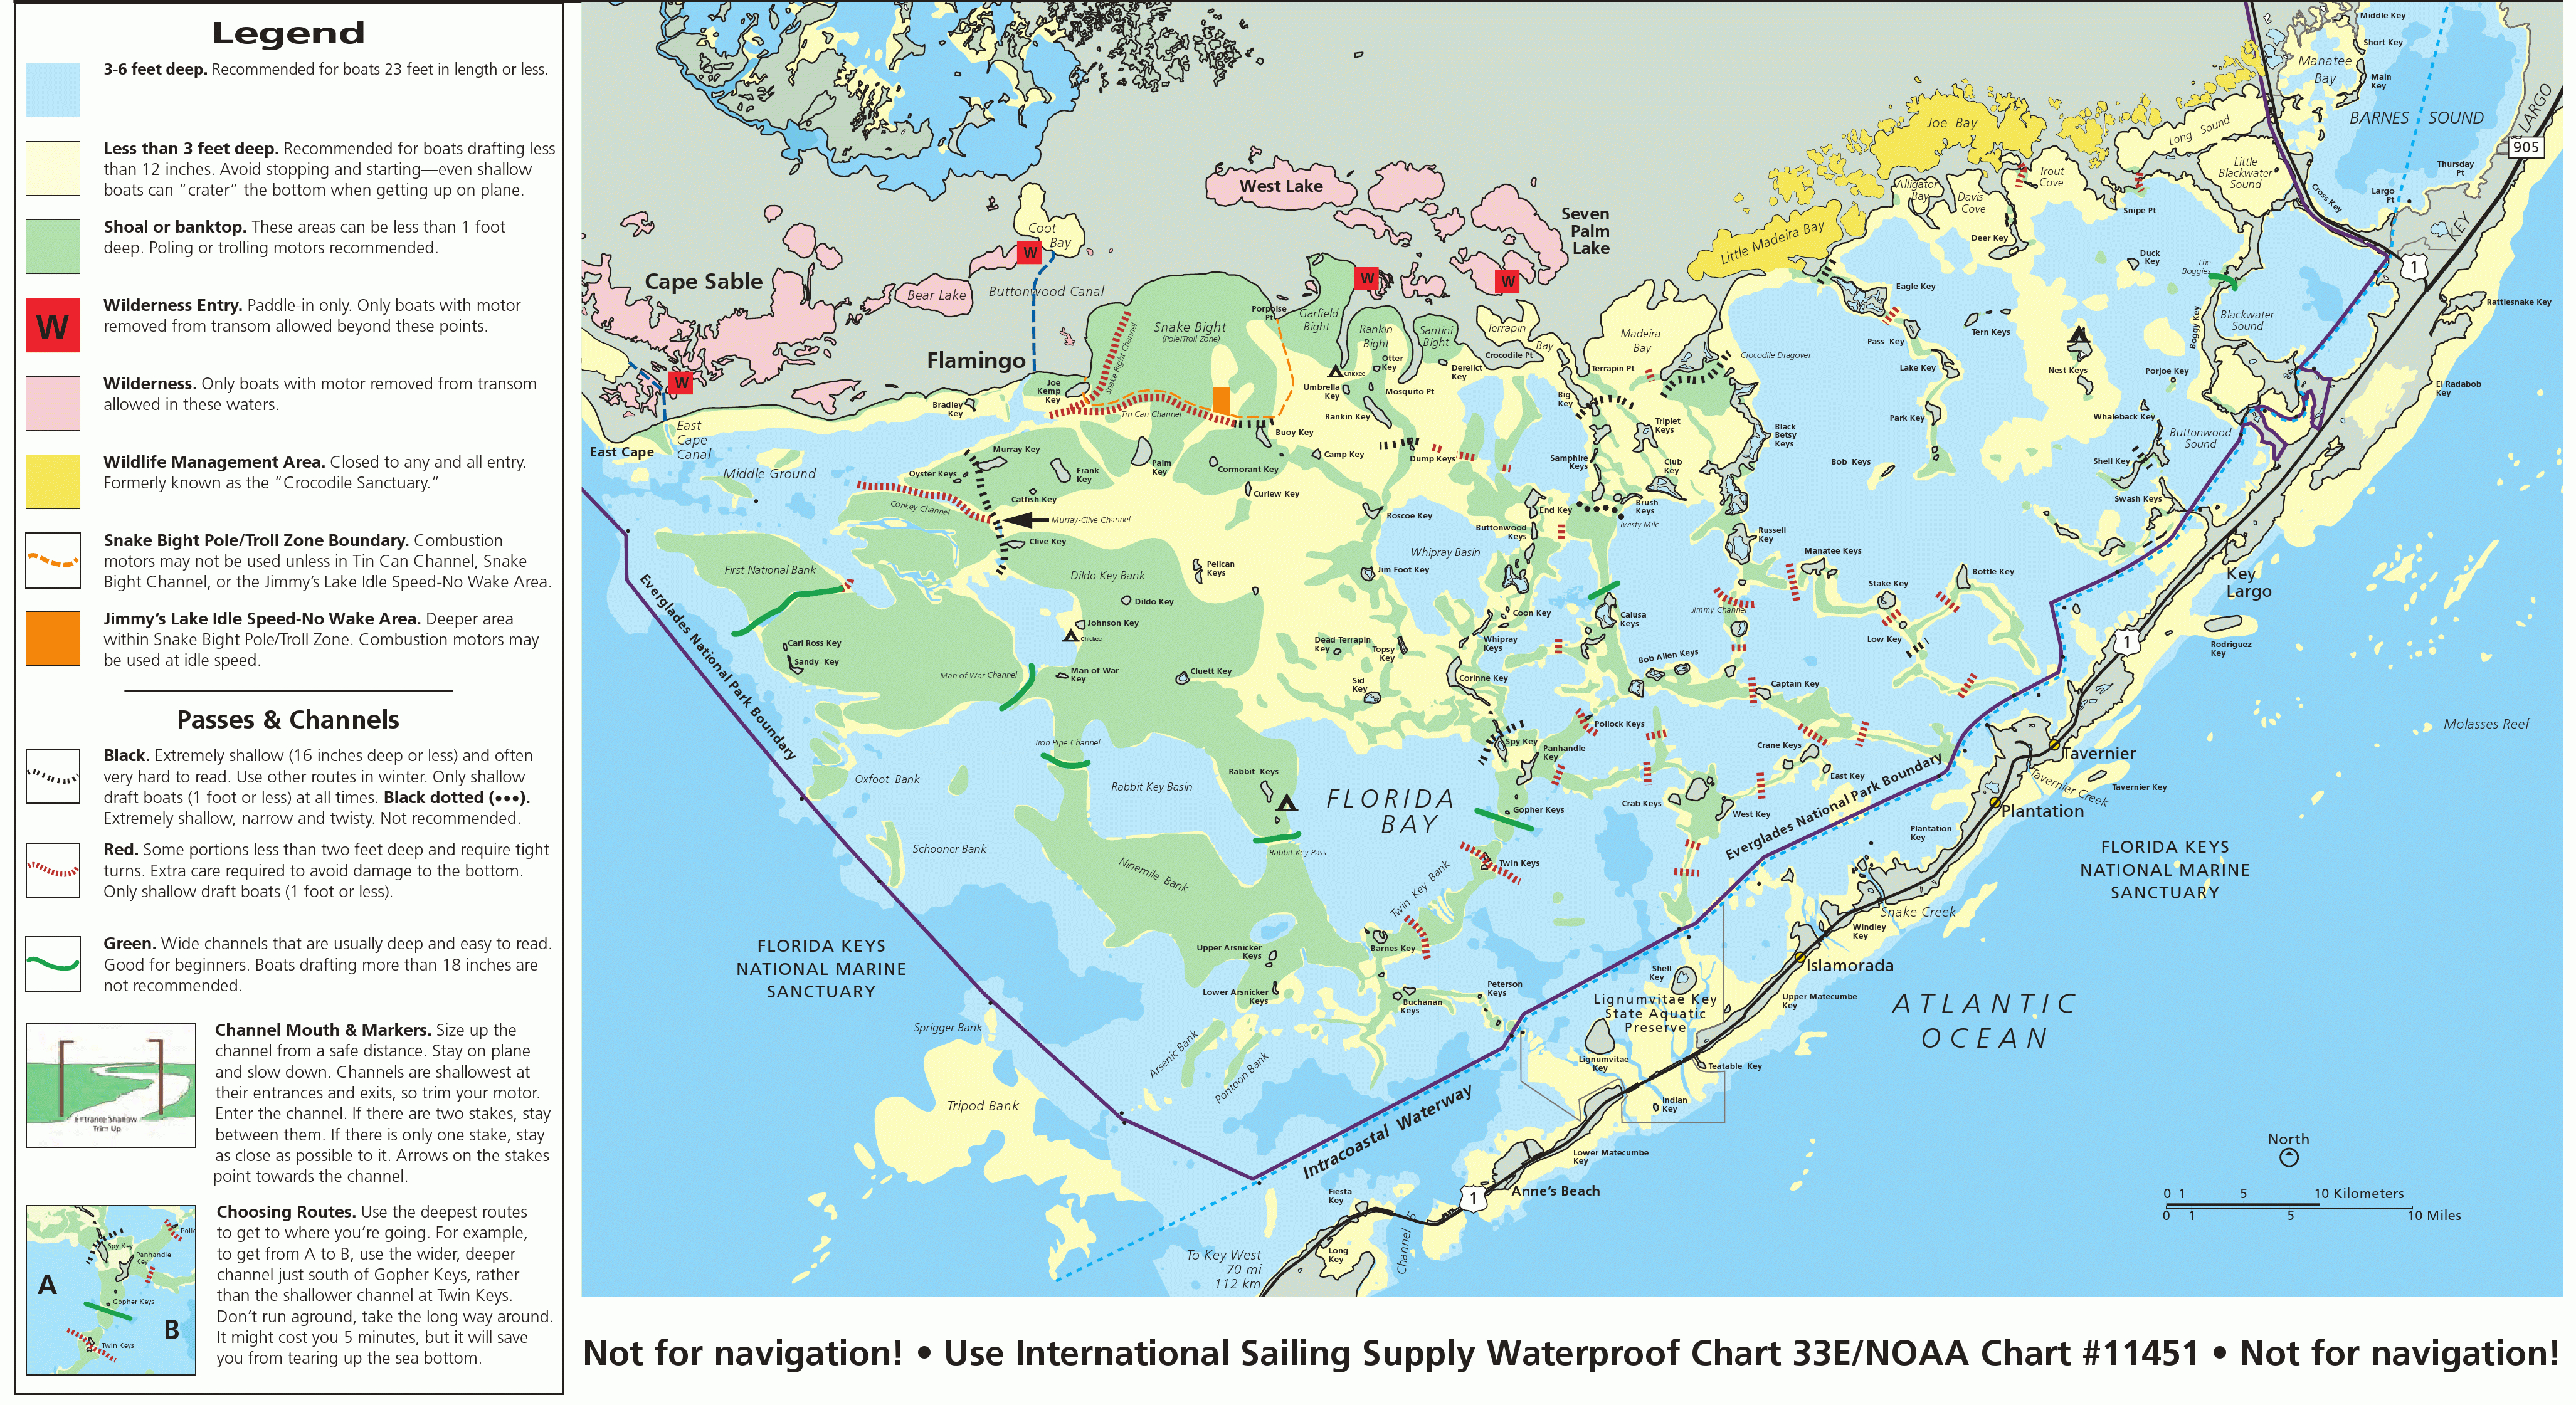 Everglades Maps | Npmaps - Just Free Maps, Period. - Map Of Florida Showing The Everglades